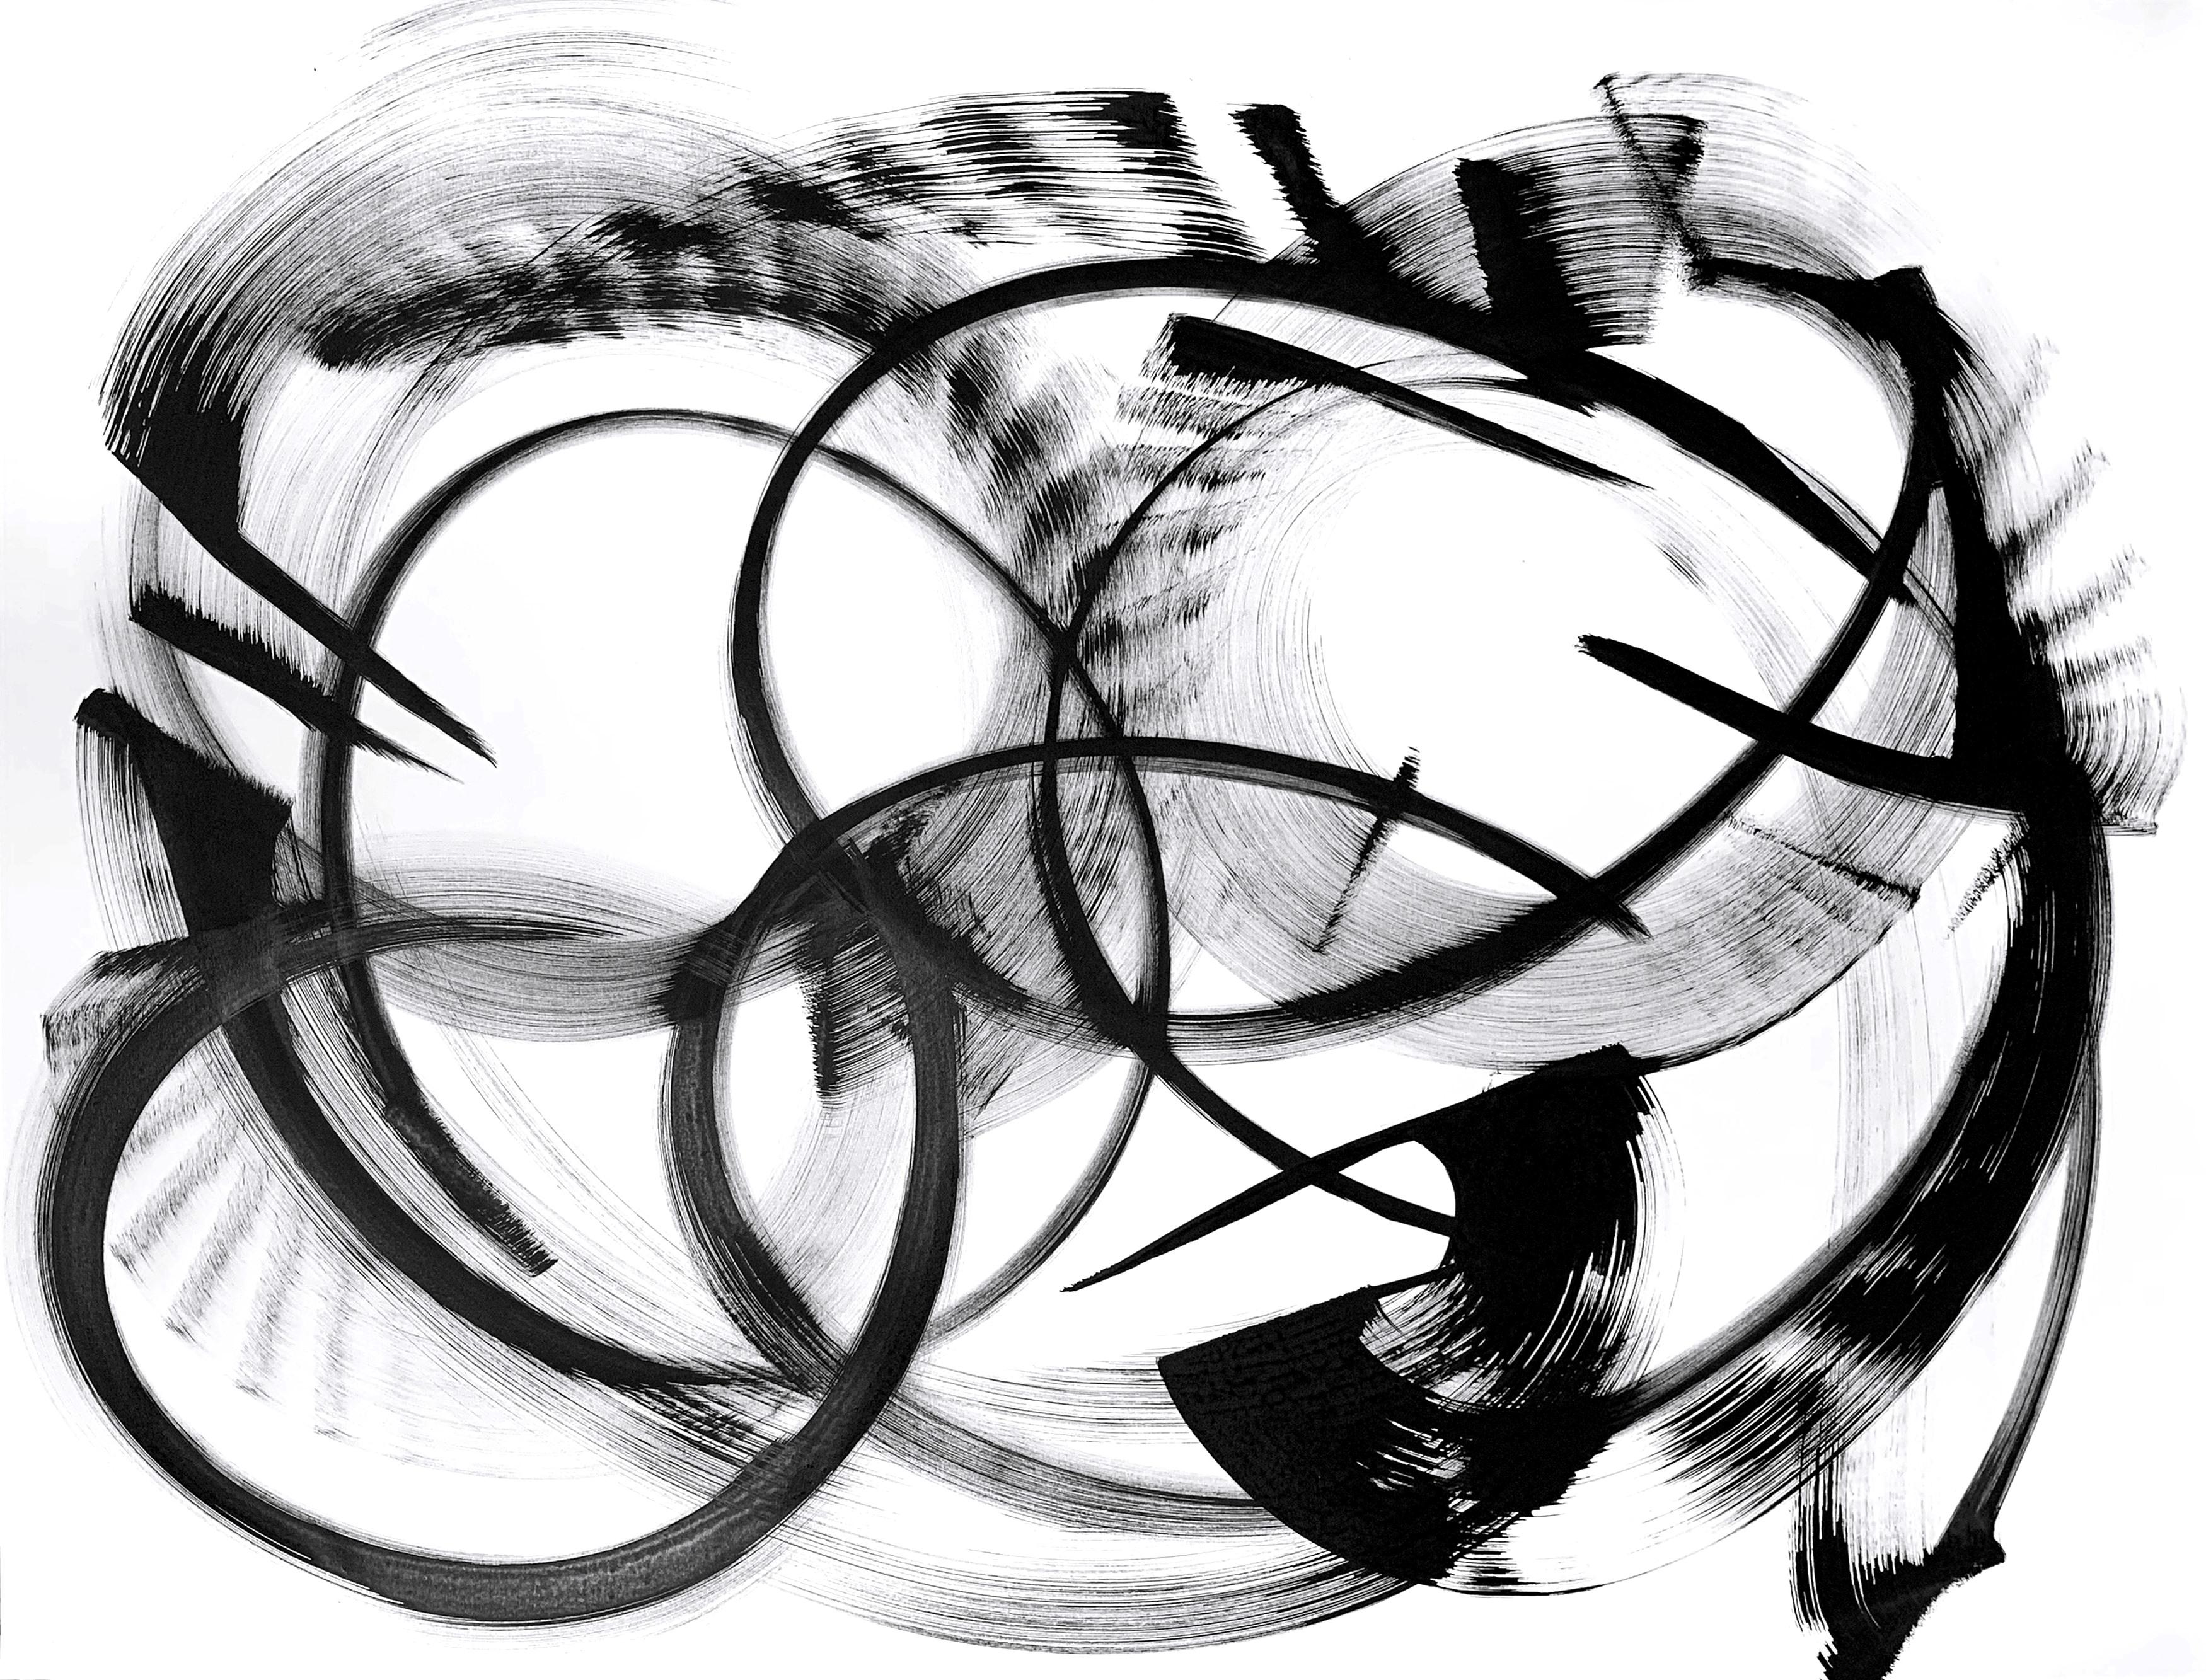 Delta Muscae - Black and White Painting - Contemporary Art by Thomas Hammer